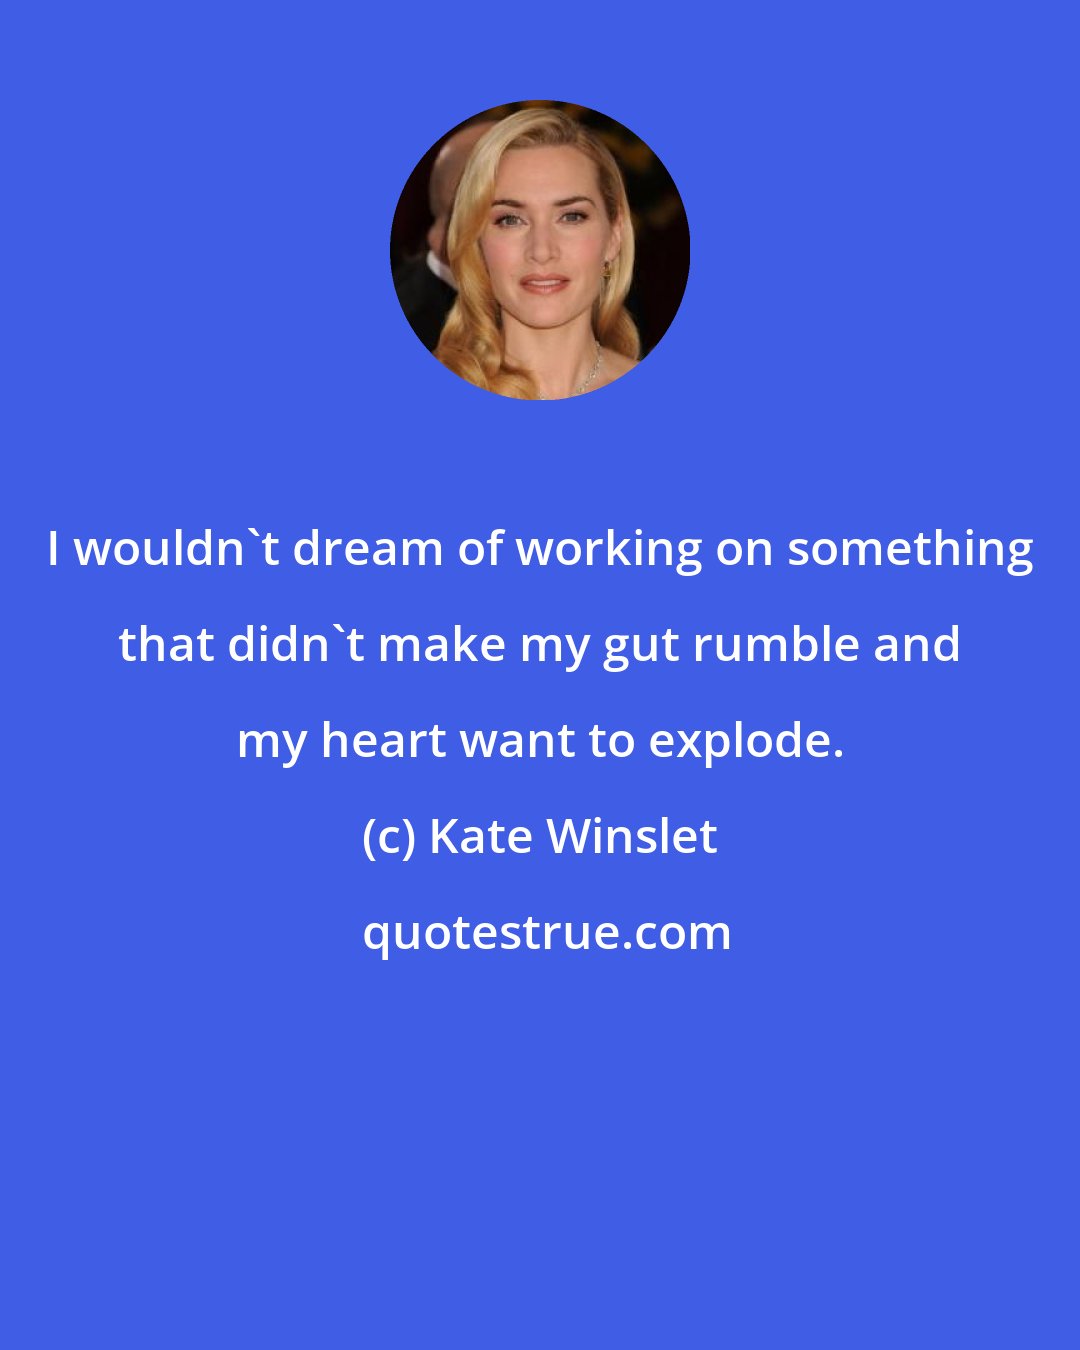 Kate Winslet: I wouldn't dream of working on something that didn't make my gut rumble and my heart want to explode.